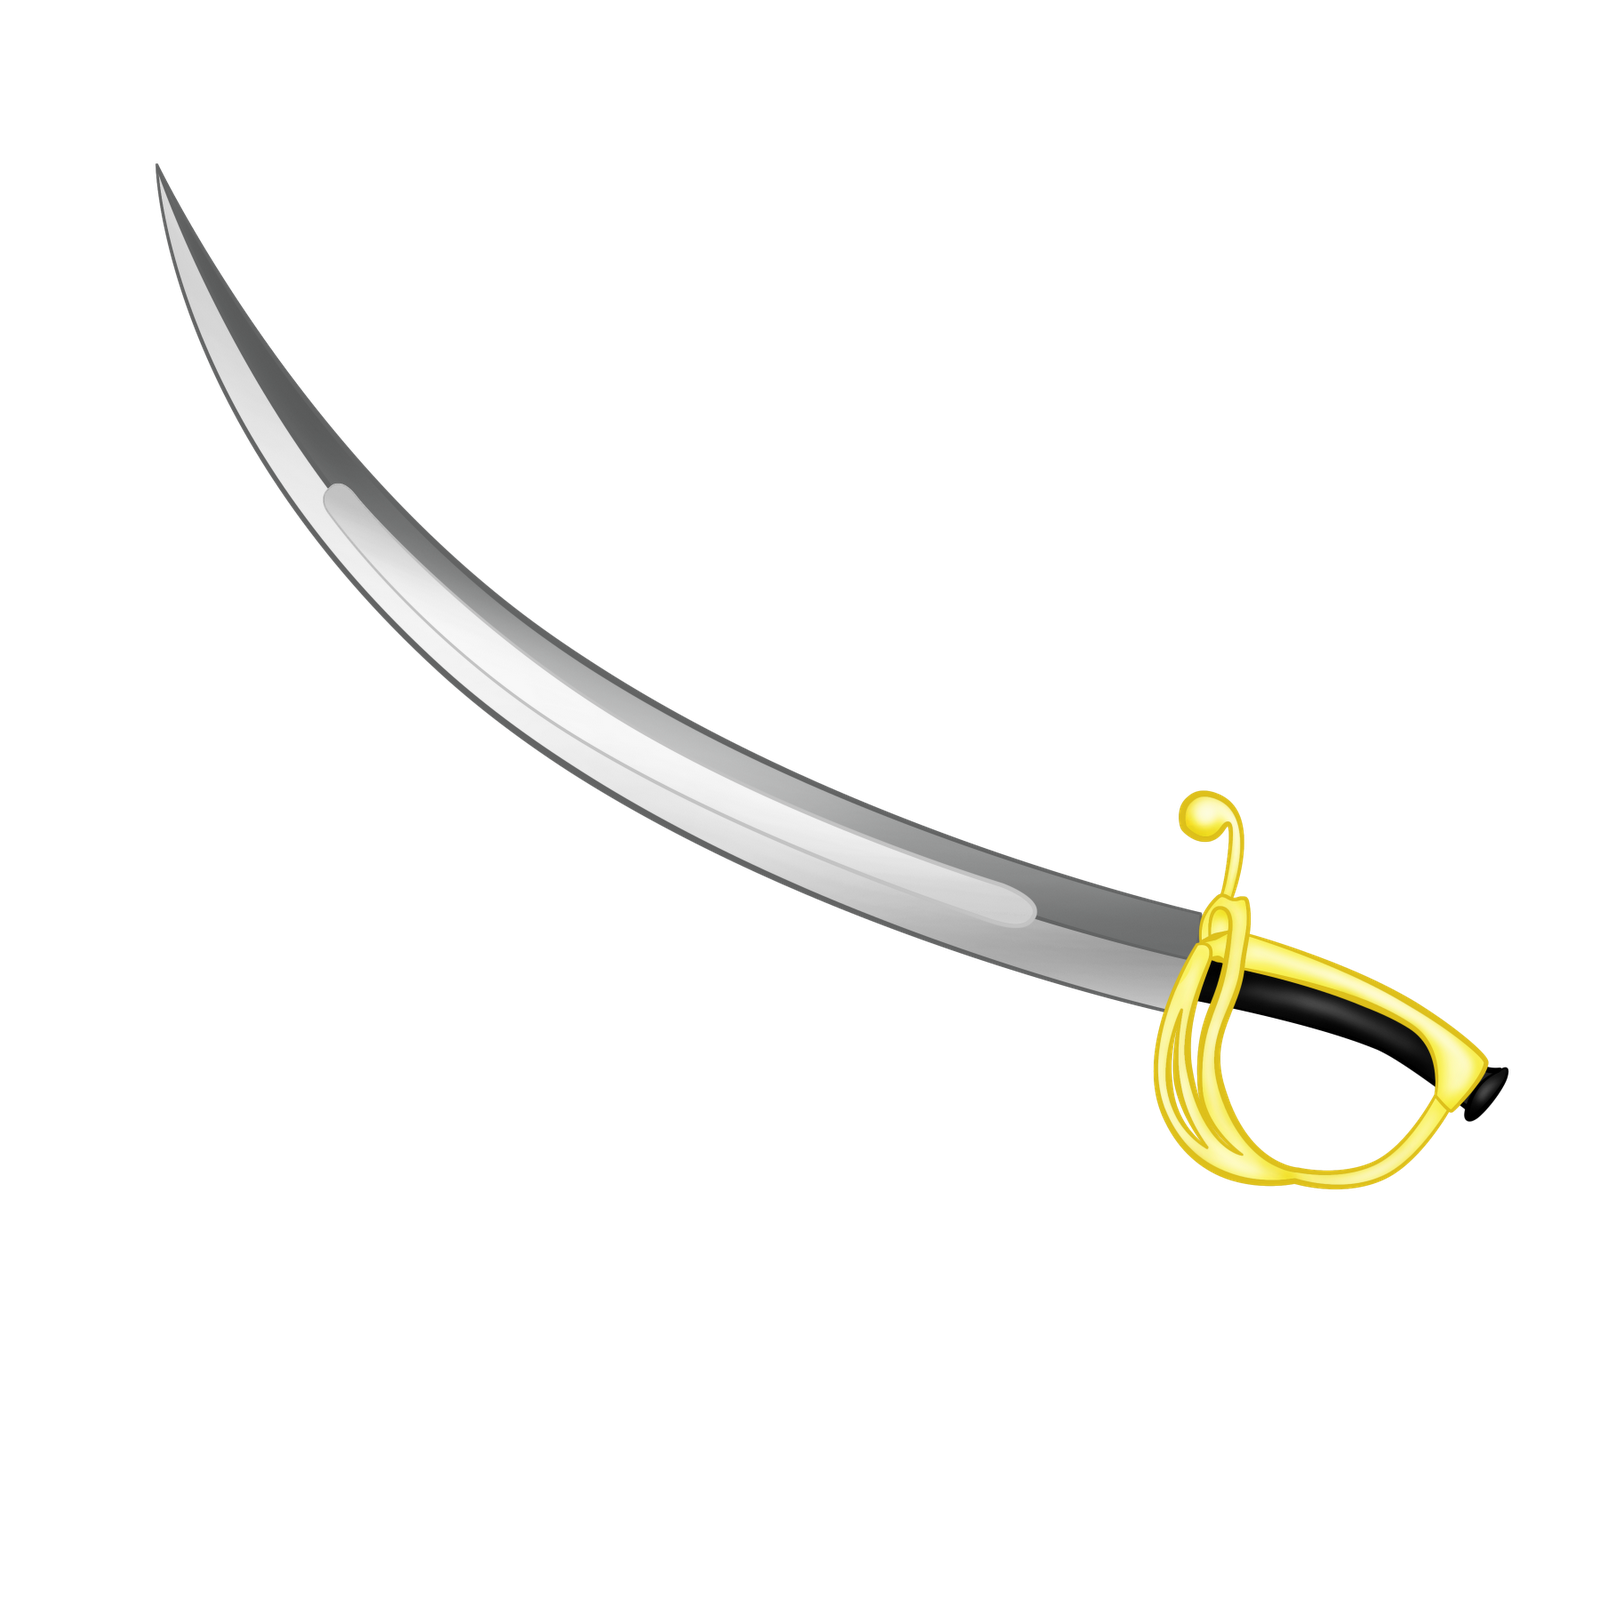 pirate clipart weapon